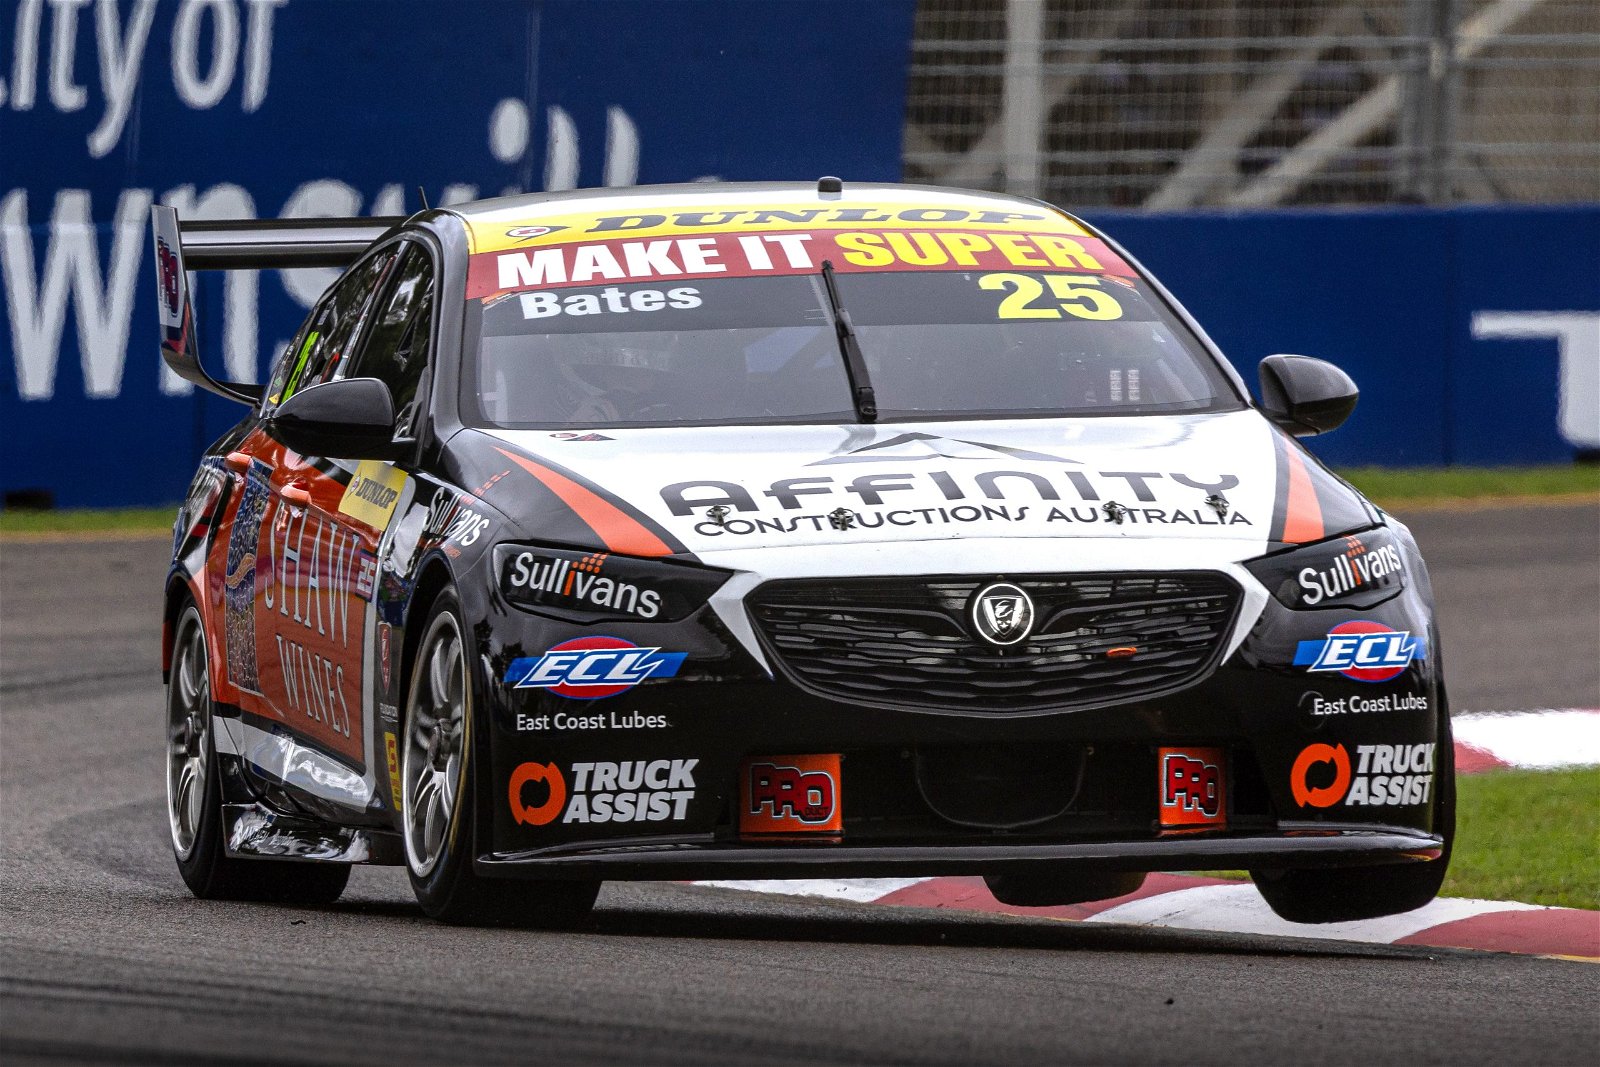 Zach Bates on track in the Walkinshaw Andretti United #25 Holden ZB Commodore.